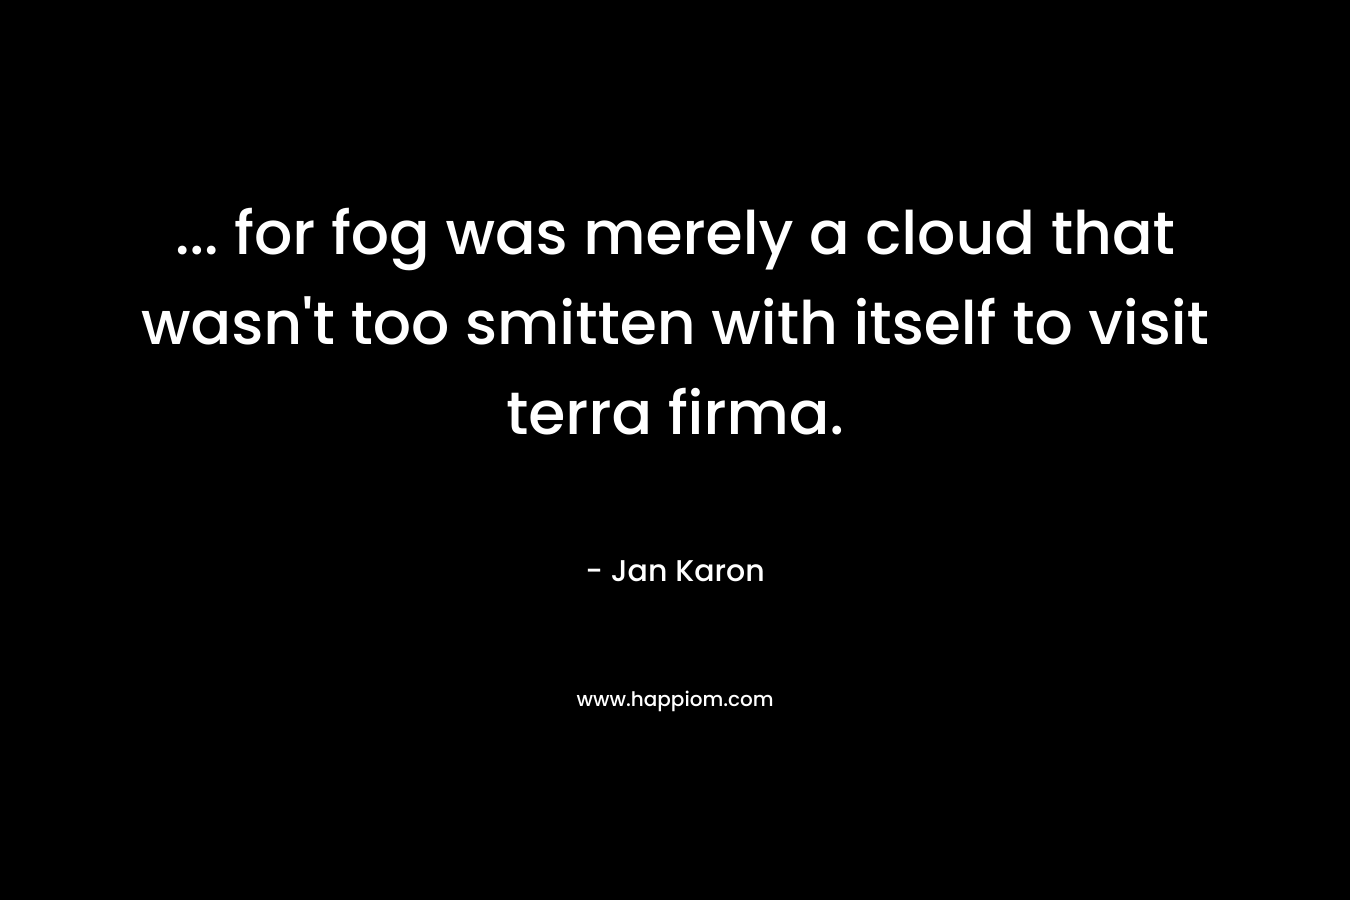 ... for fog was merely a cloud that wasn't too smitten with itself to visit terra firma.